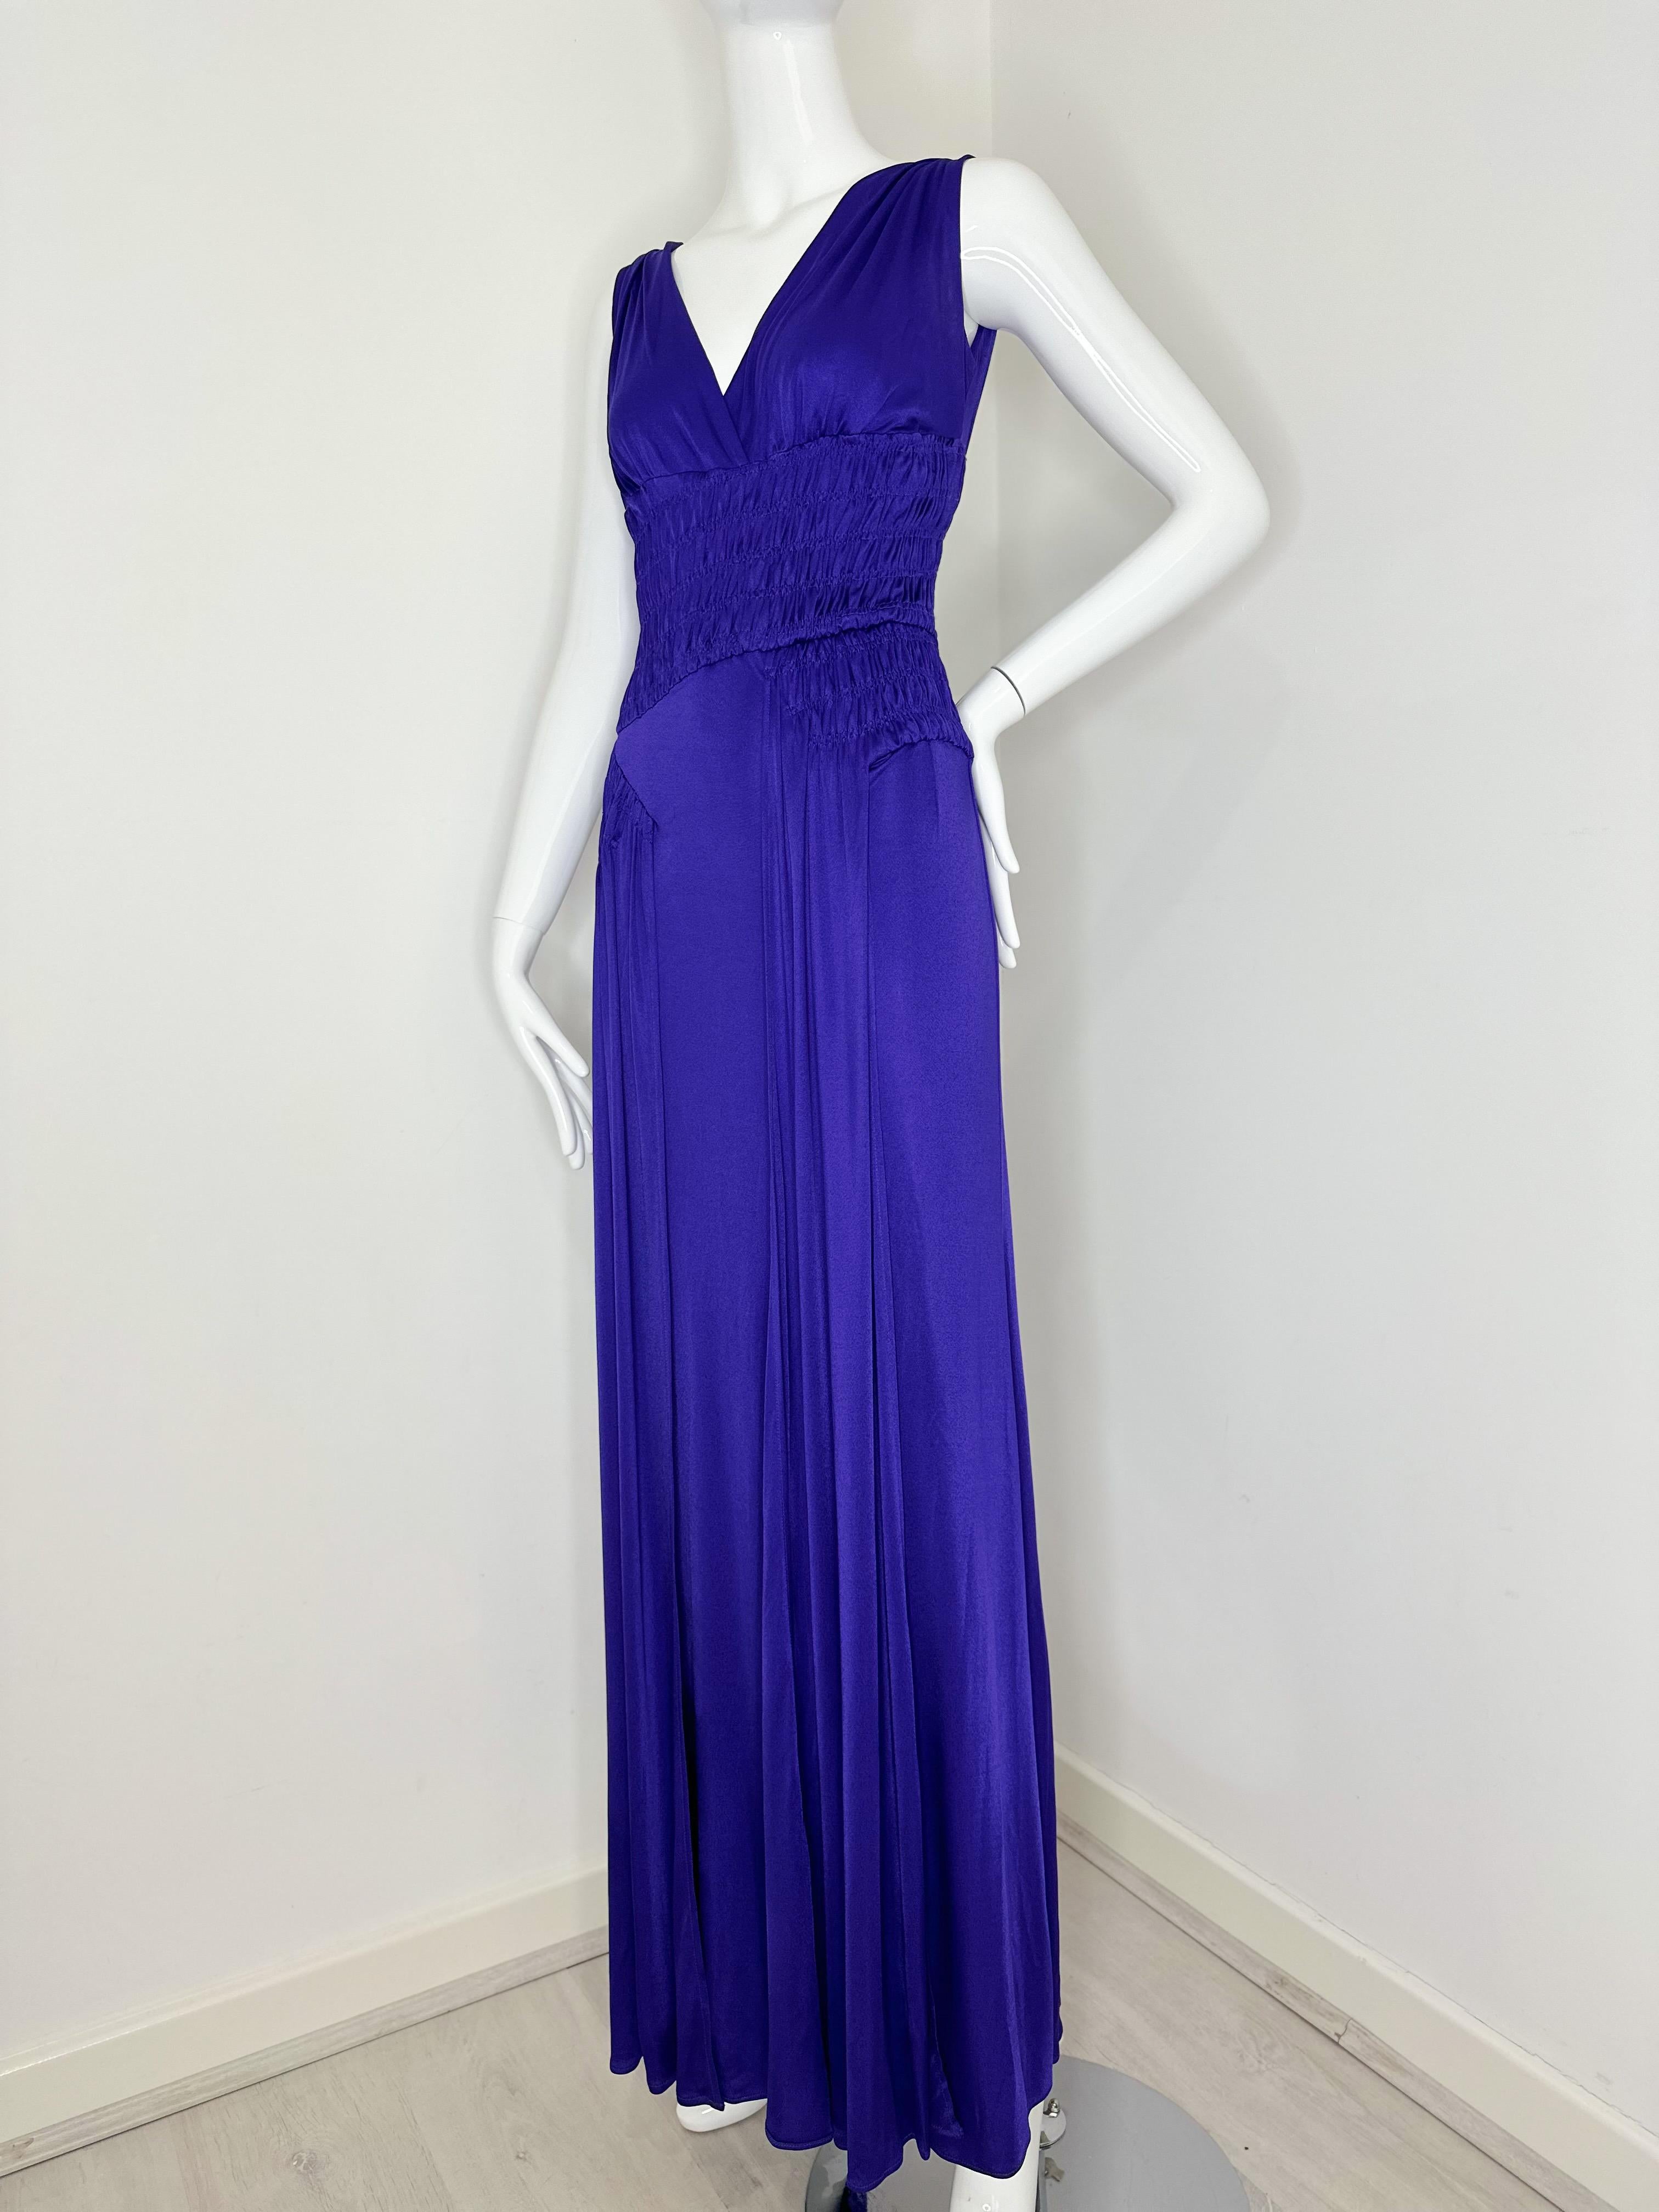 Christian Dior deep purple gown dress 
Size IT42 

Great pre owned condition without flaws 

Elastic waist

The fabric is very soft and pleasant to the touch 

Originally $5000